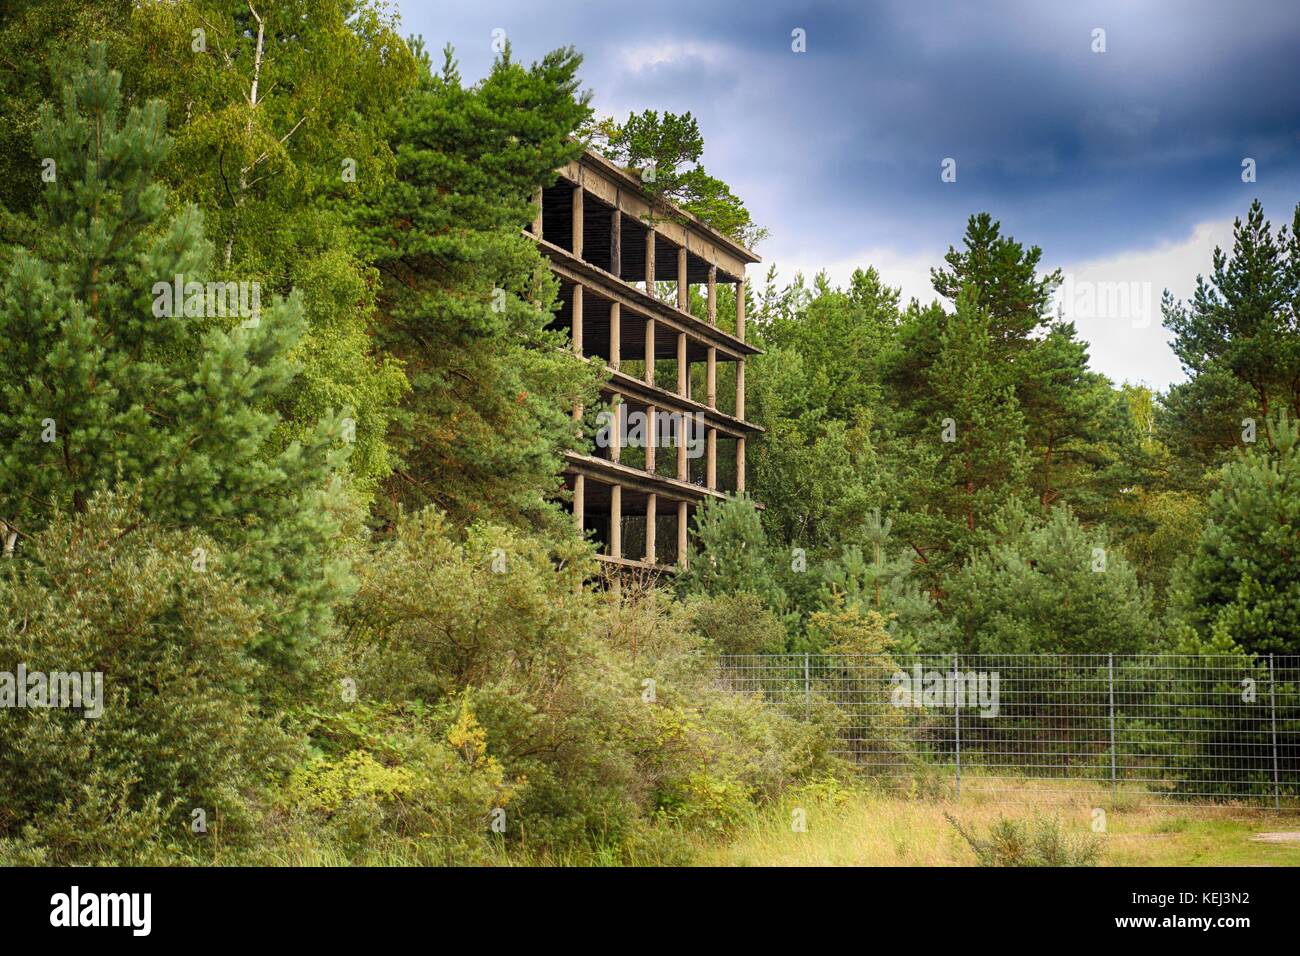 Abandoned falling apart Building at Prora built as a beach resort by Nazi Germany on the island of Rügen, Germany Stock Photo